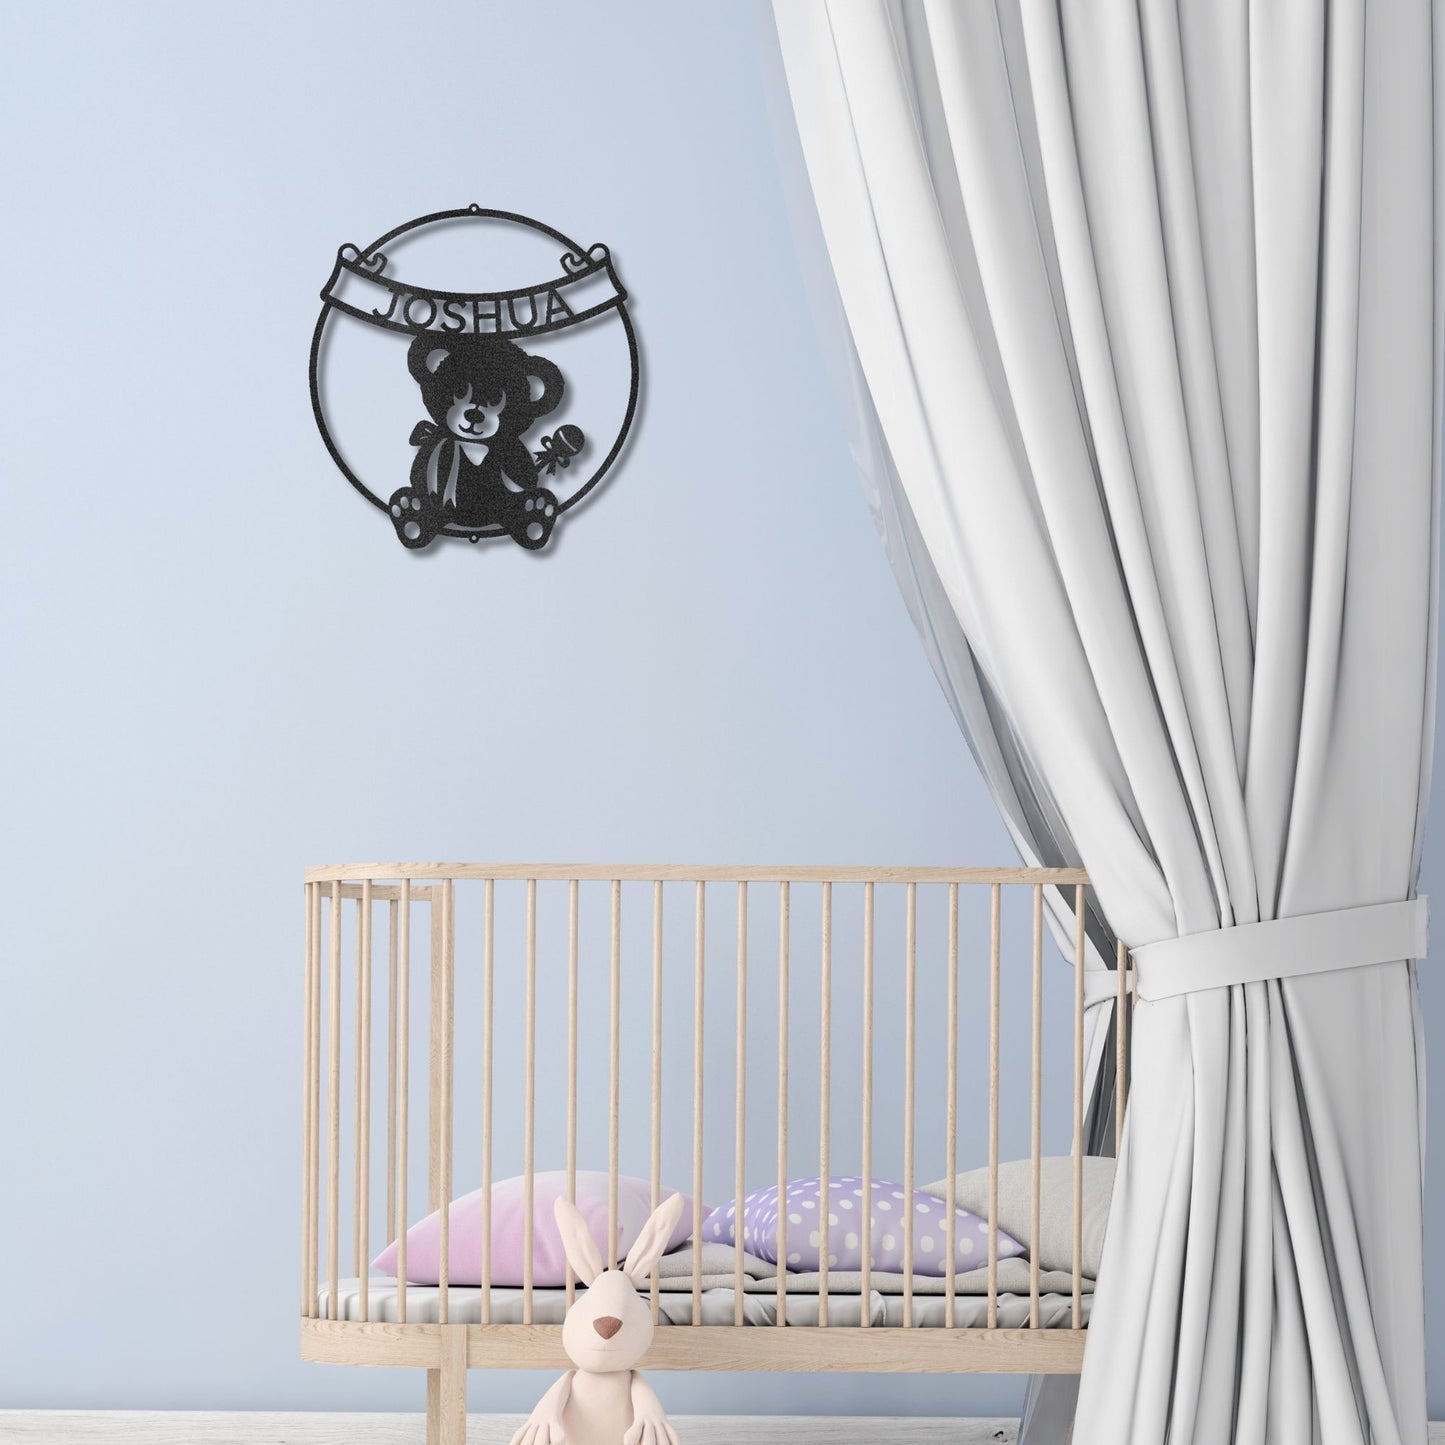 Cherished Teddy Bear: Personalized Metal Name Sign for Children